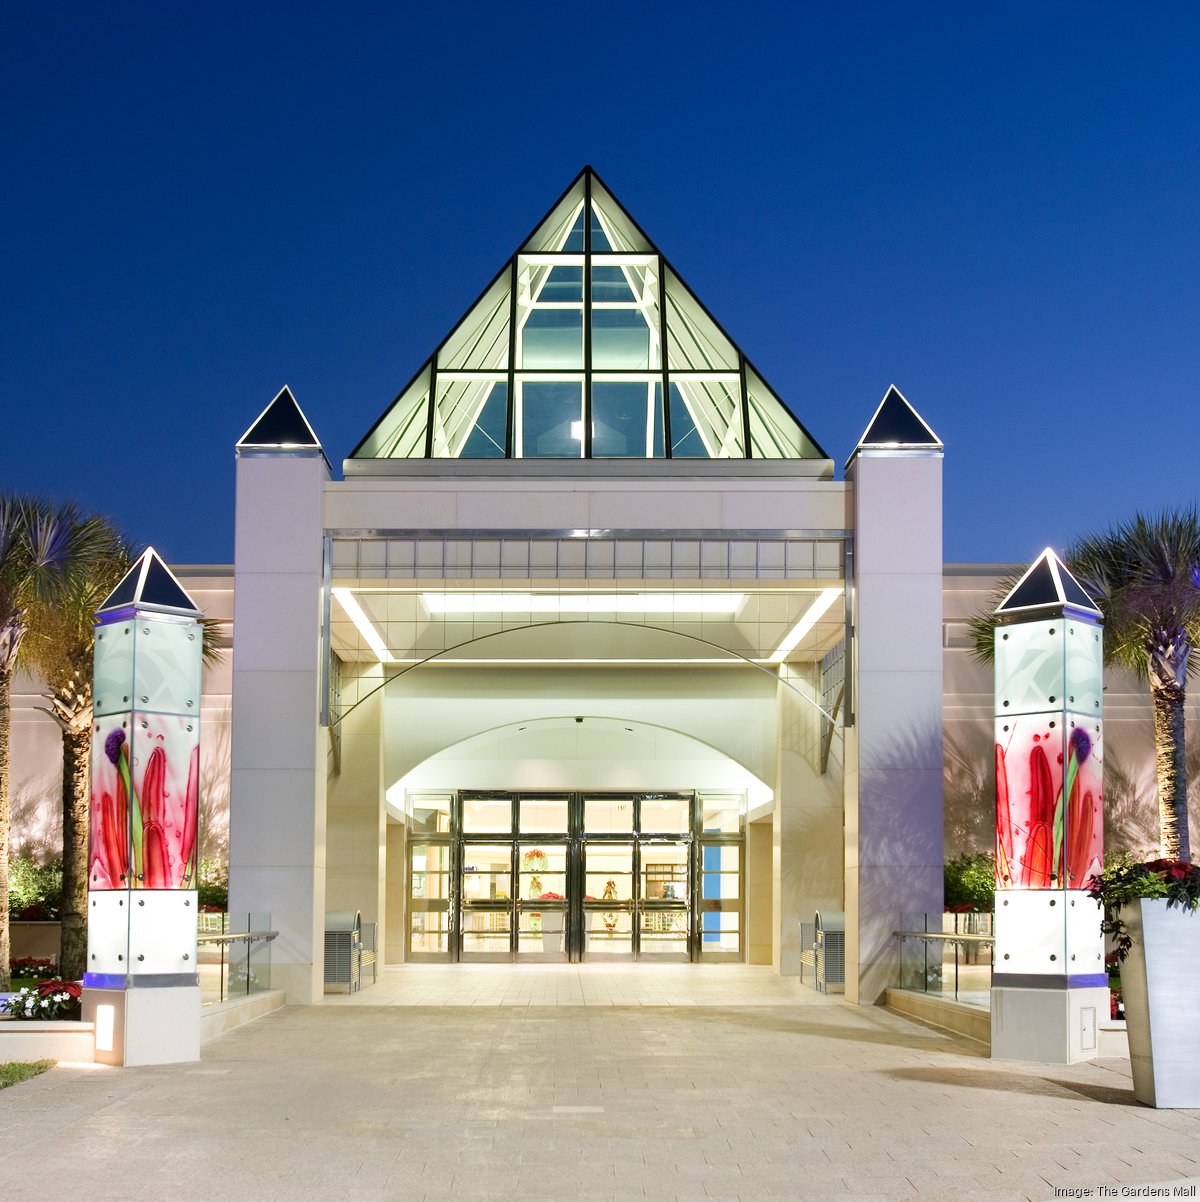 Town Center at Boca Raton welcomes new luxury retailers